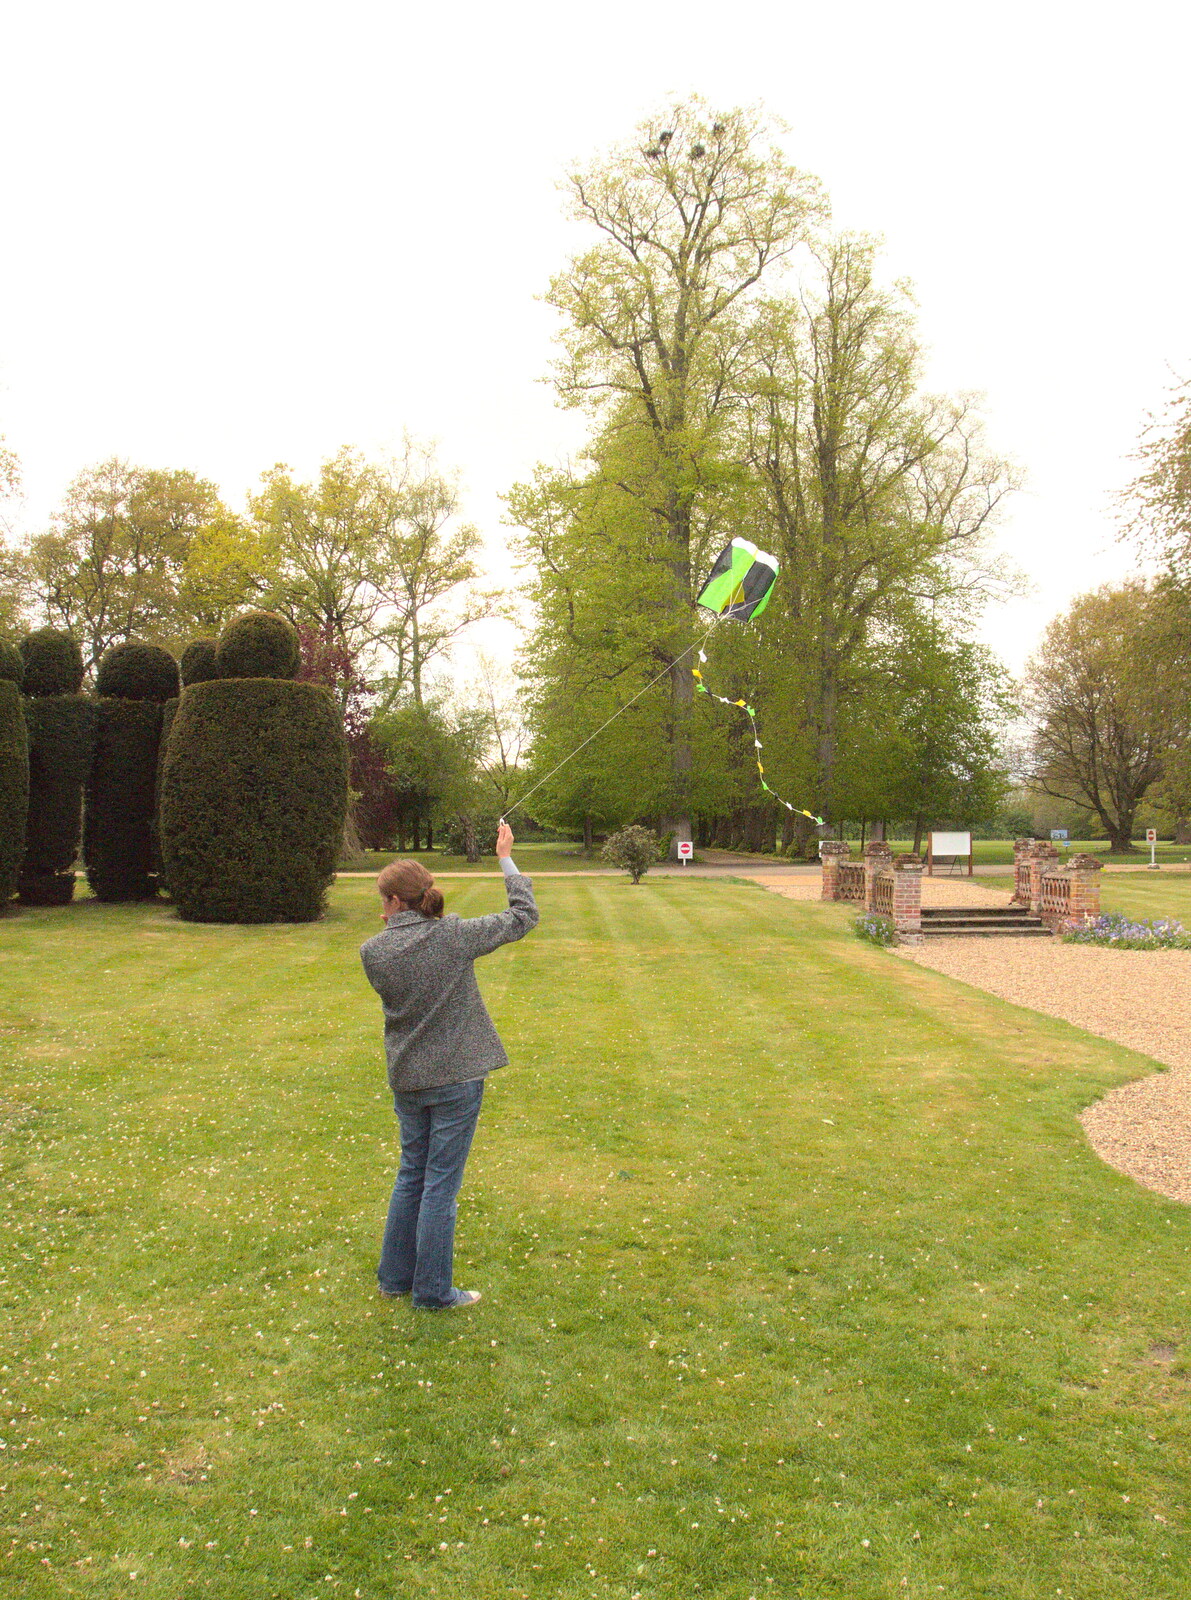 Isobel's kite flies around from Campfires, Oaksmere Building and a BSCC Bike Ride, Brome, Suffolk - 4th May 2017